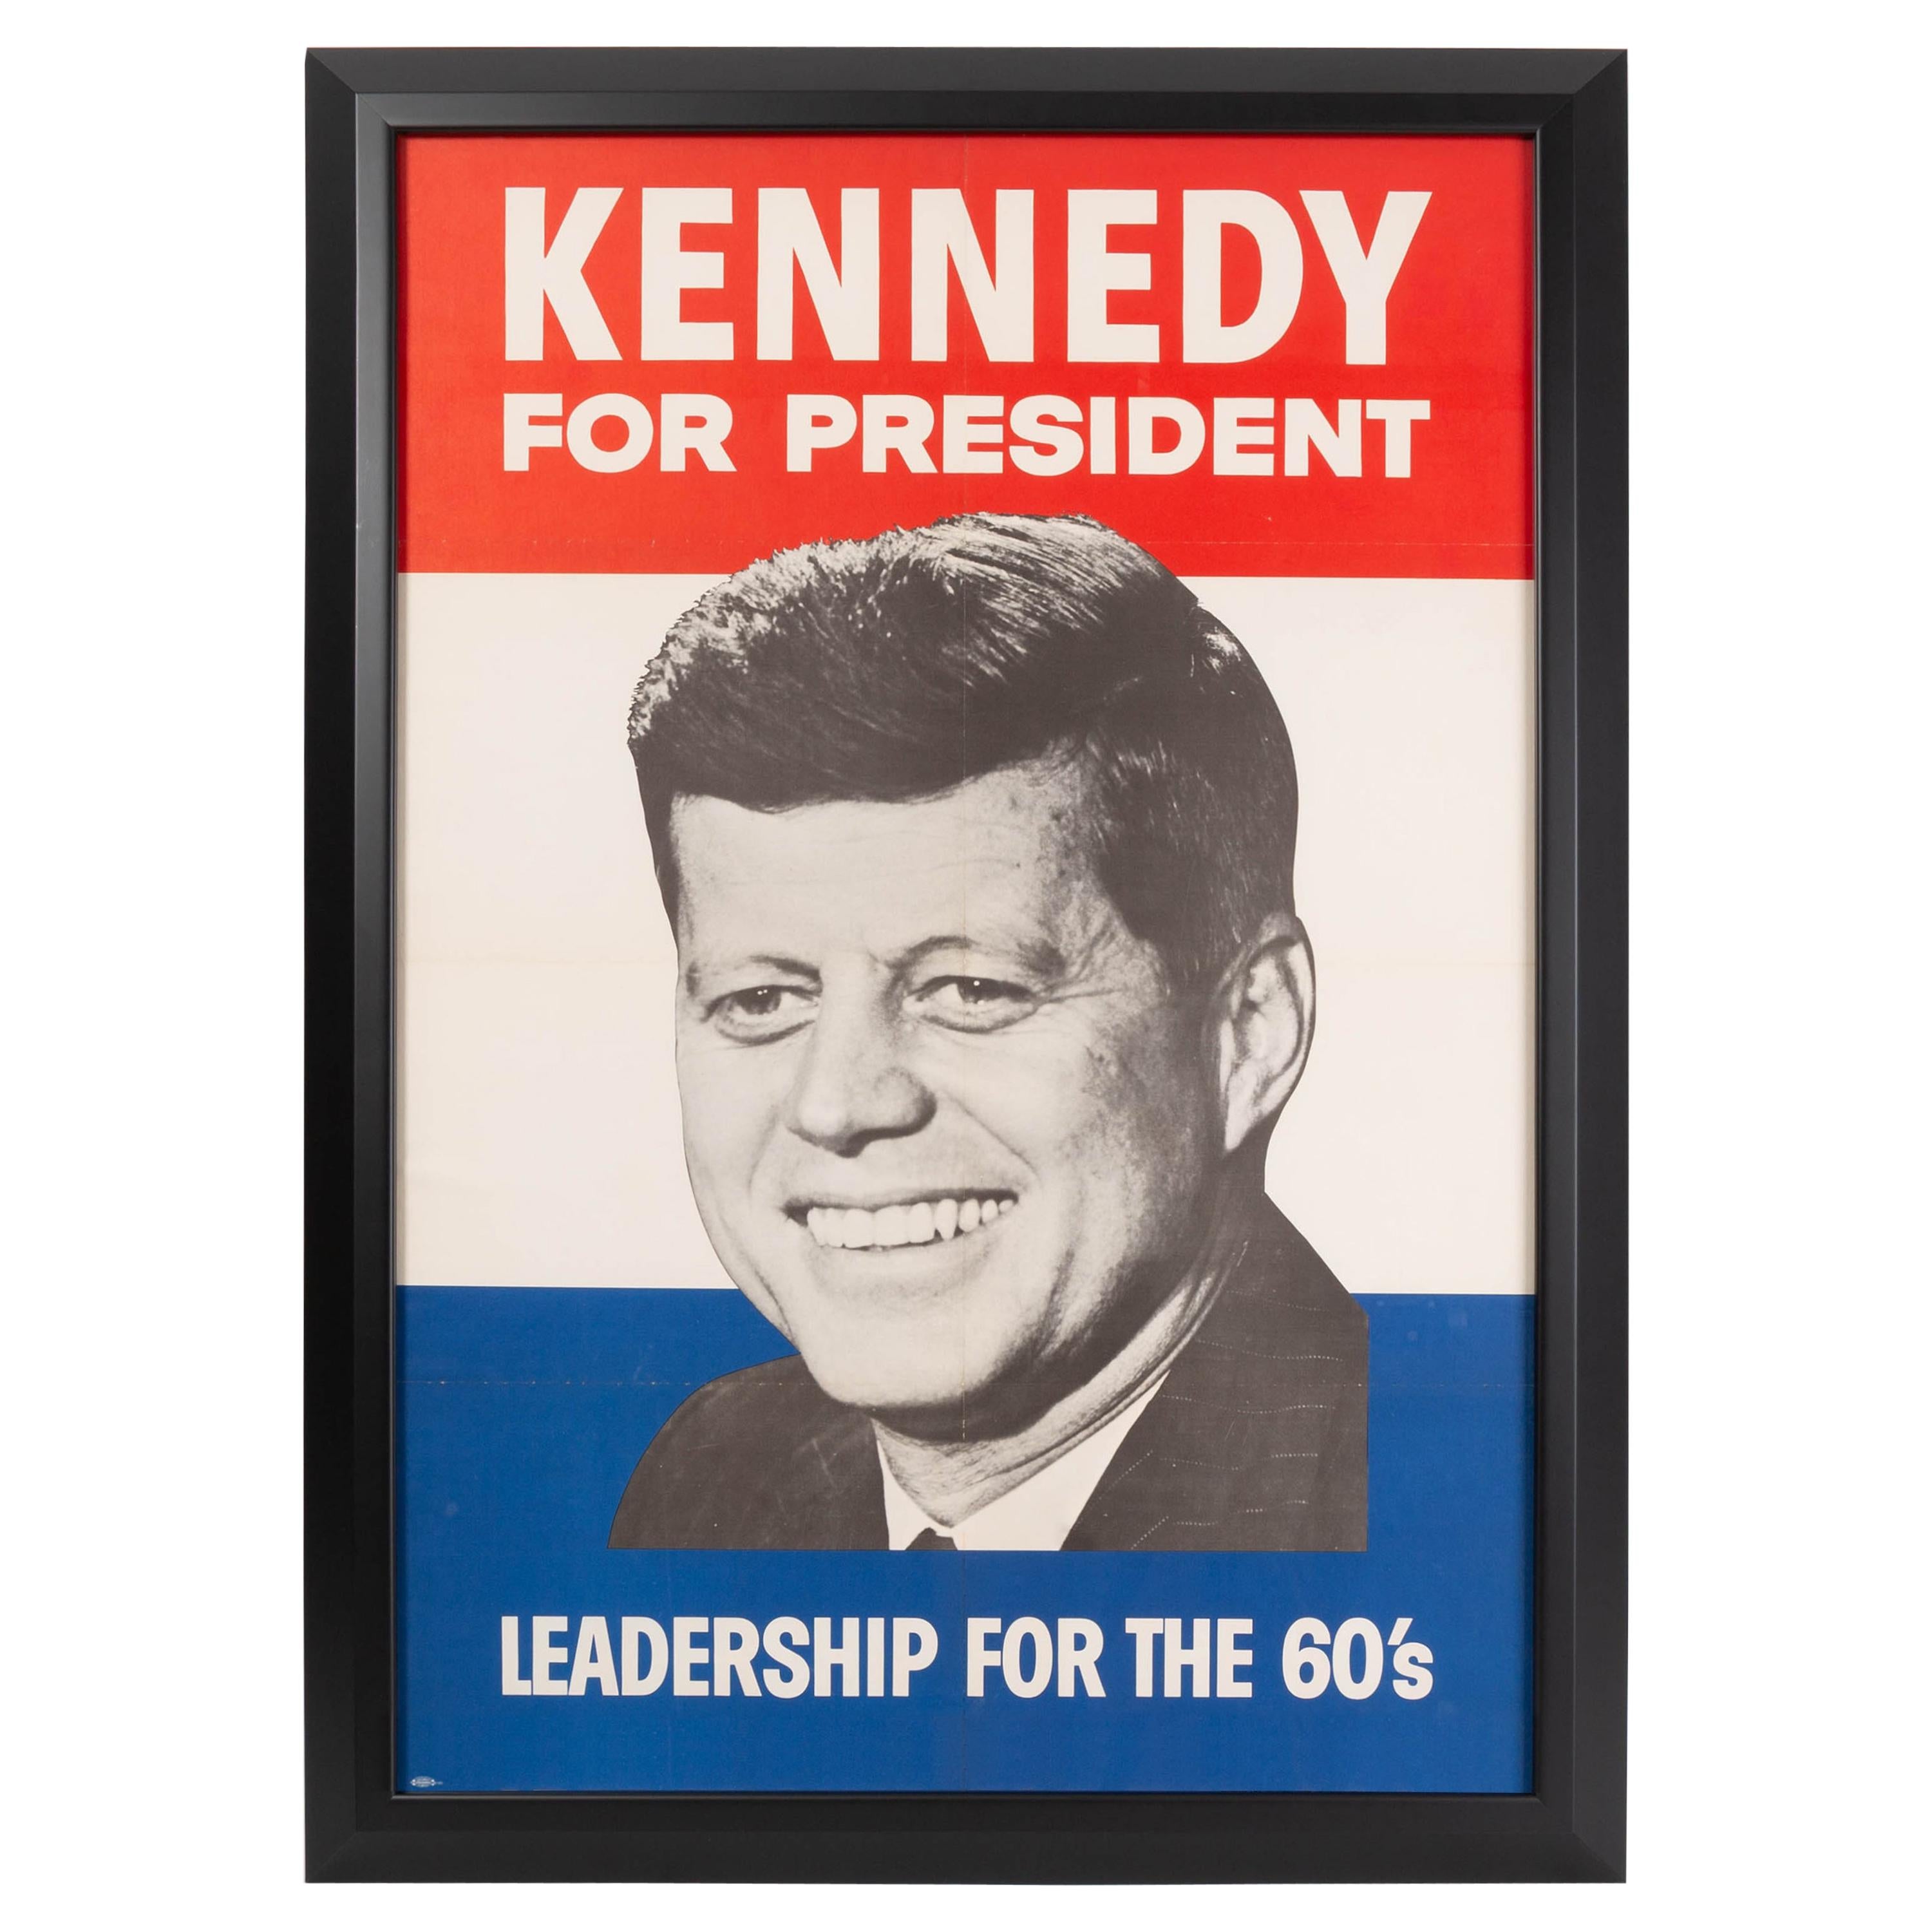 "Kennedy for President" Original Presidential Campaign Poster, 1960